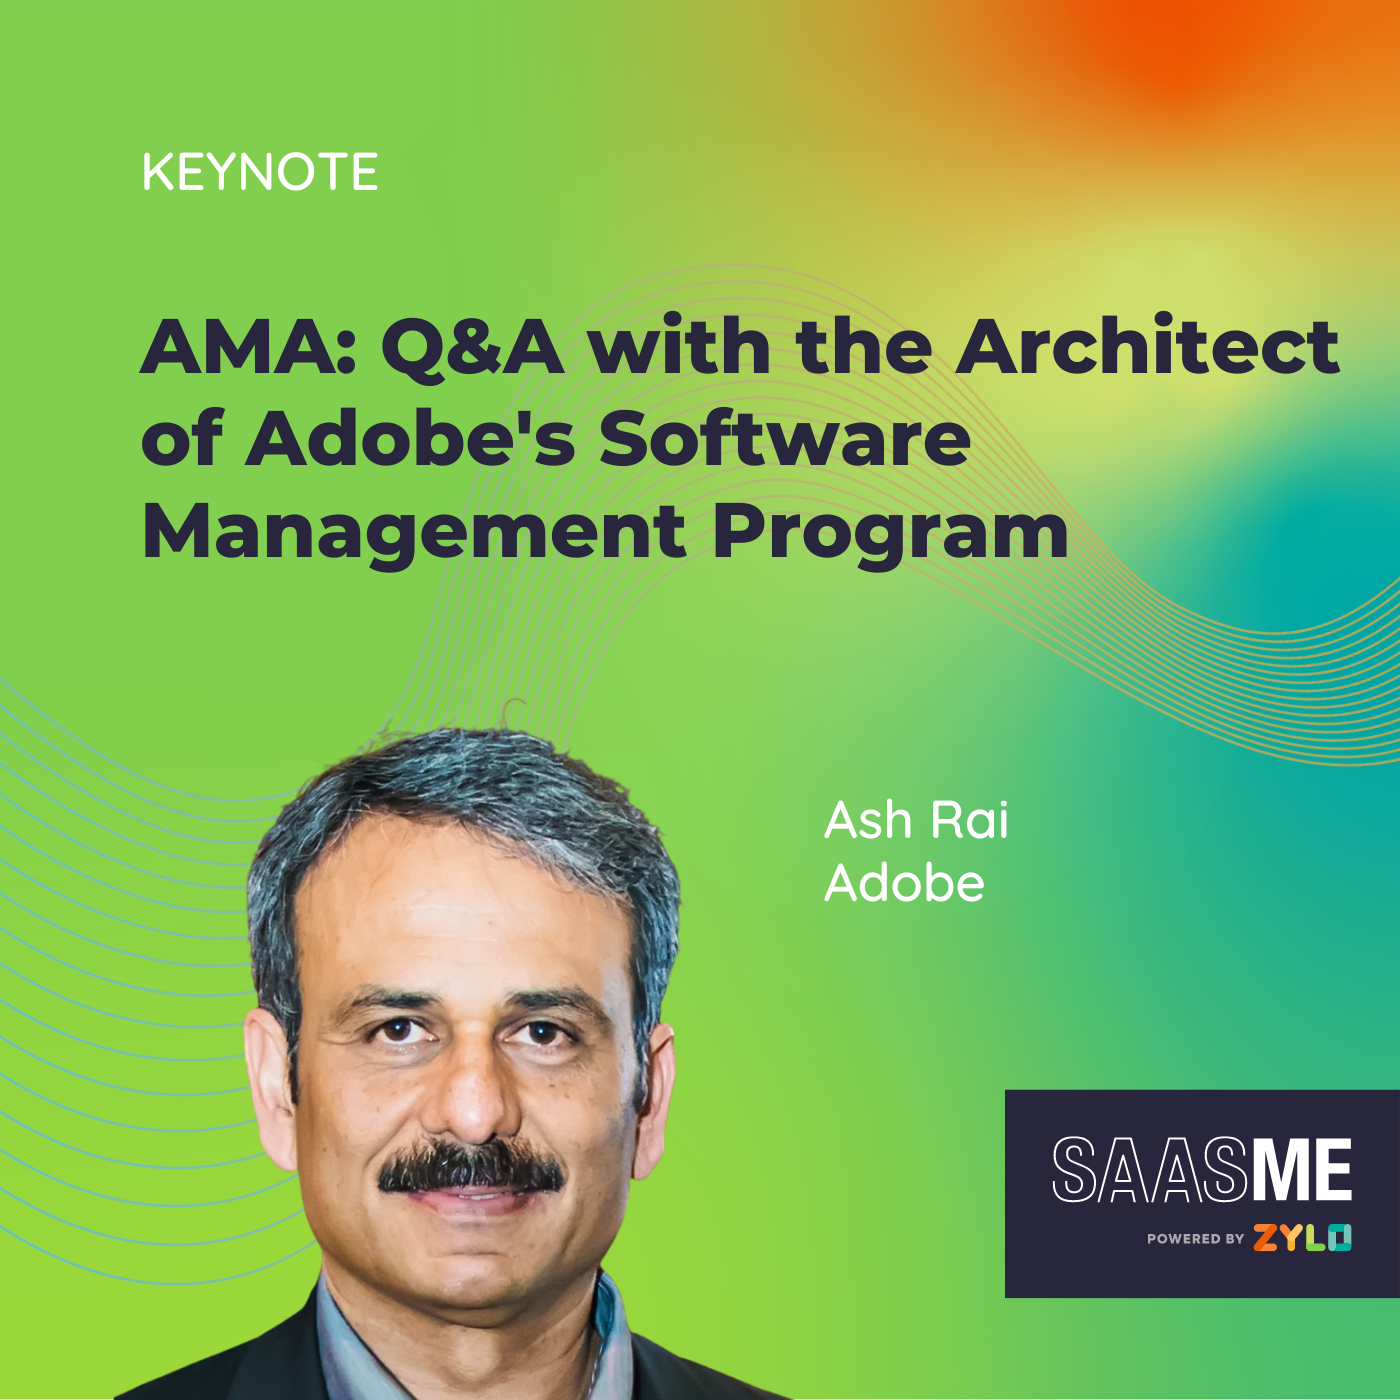 Ask Me Anything: Q&A with the Architect of Adobe’s Software Management Program